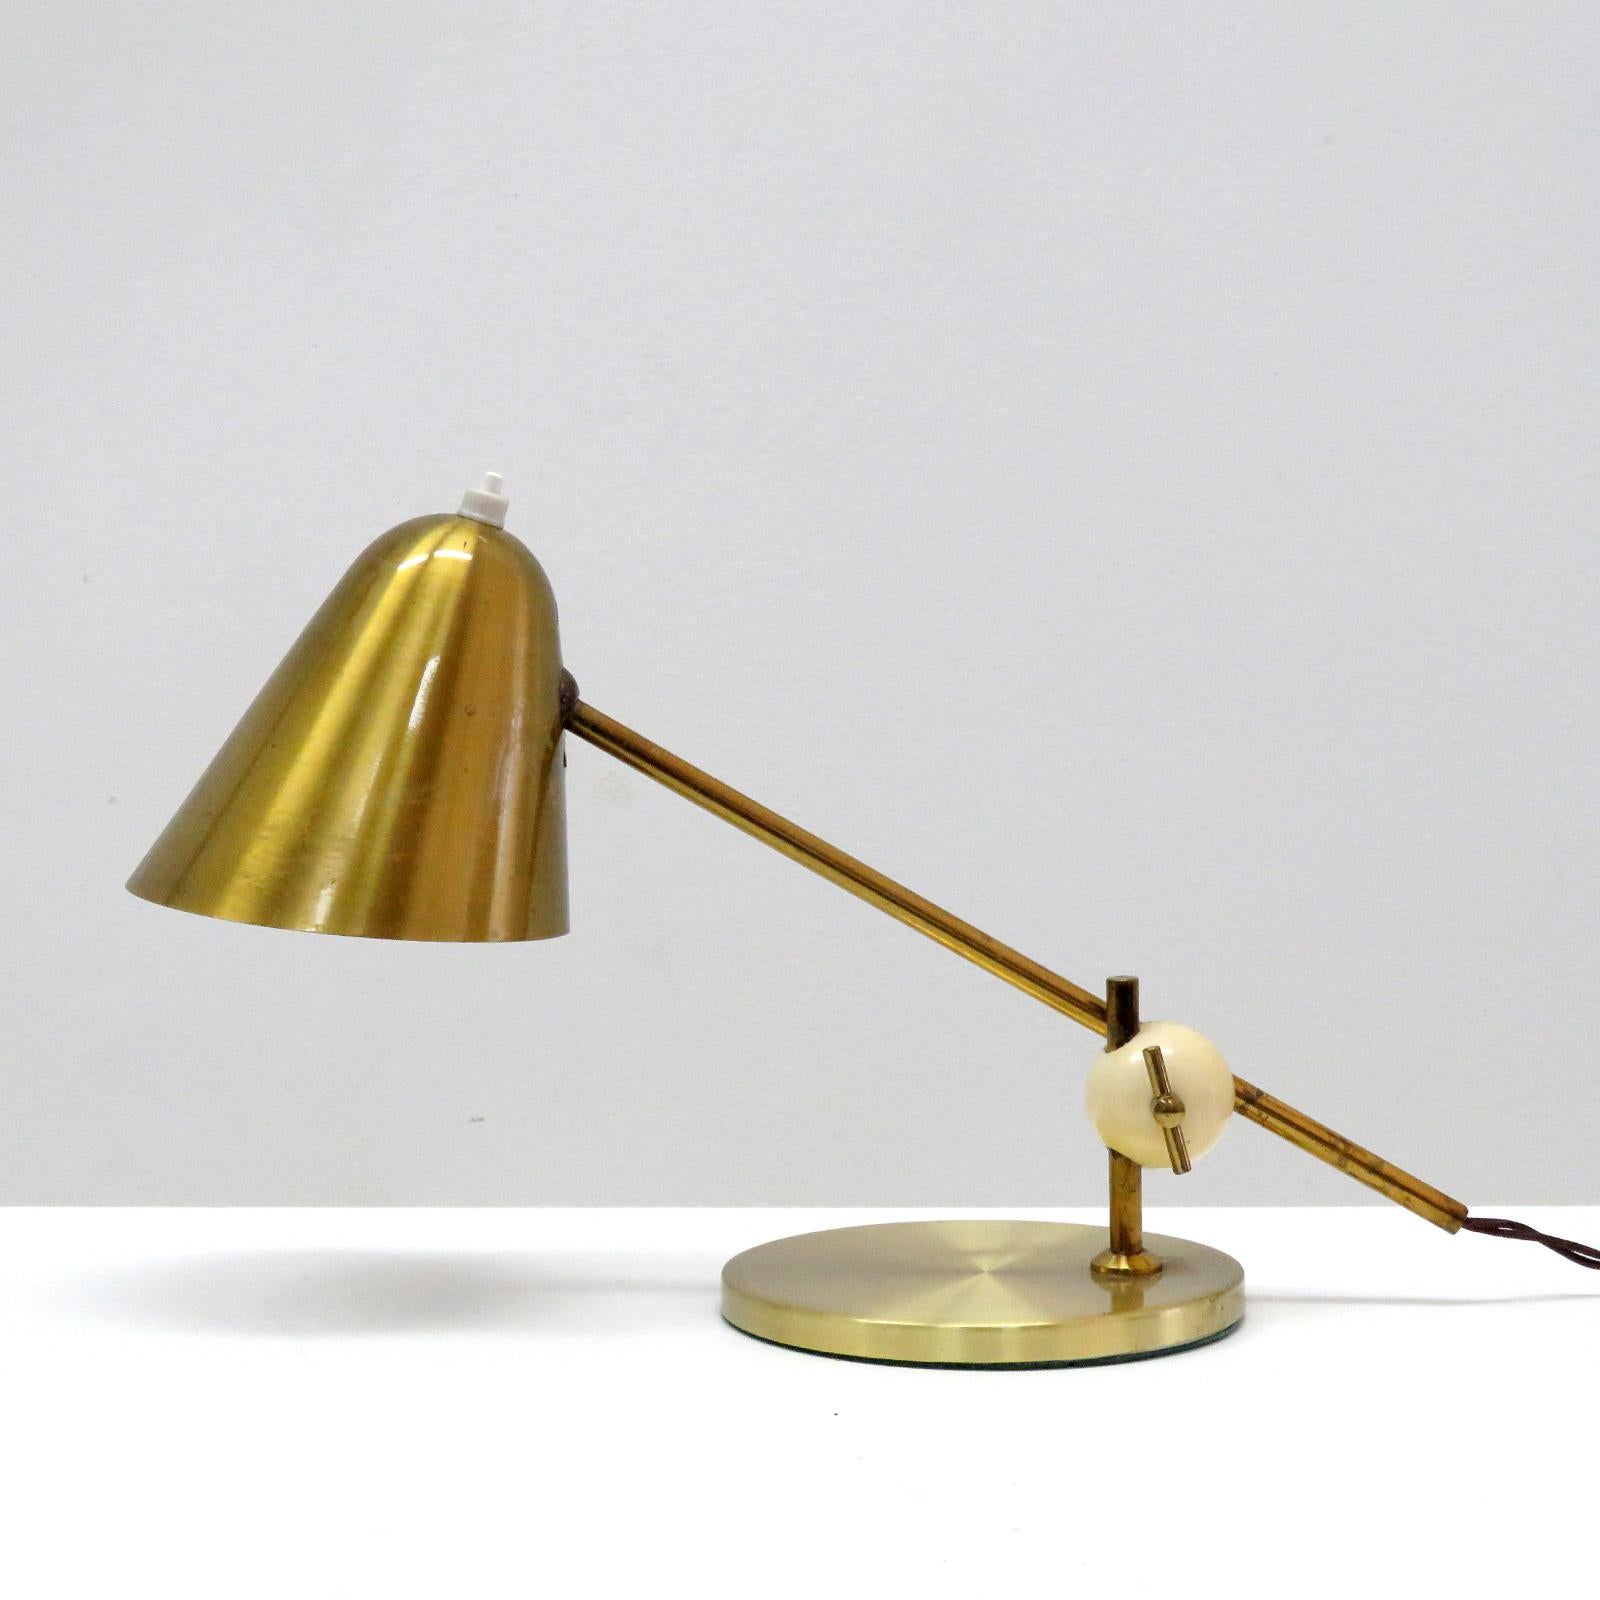 Wonderful brass table lamp by Jacques Biny with wonderful patina, adjustable at the hood and the white bakelite ball joint.